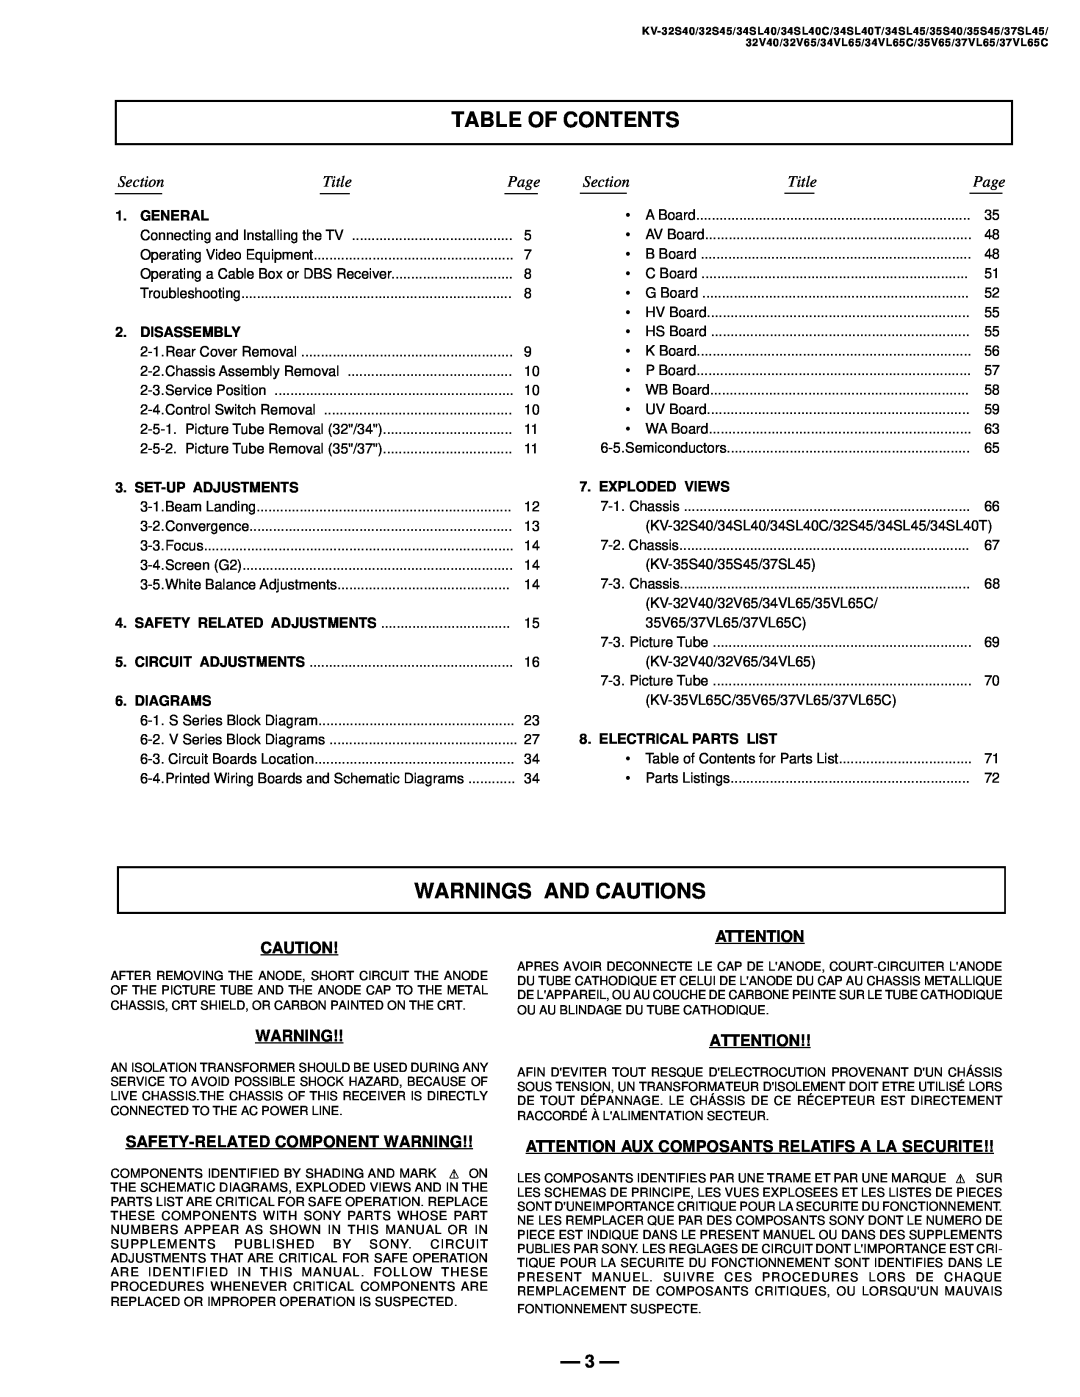 Sony KV 32V65 Table Of Contents, Warnings And Cautions, Section, Title, Page, Safety-Related Component Warning, General 